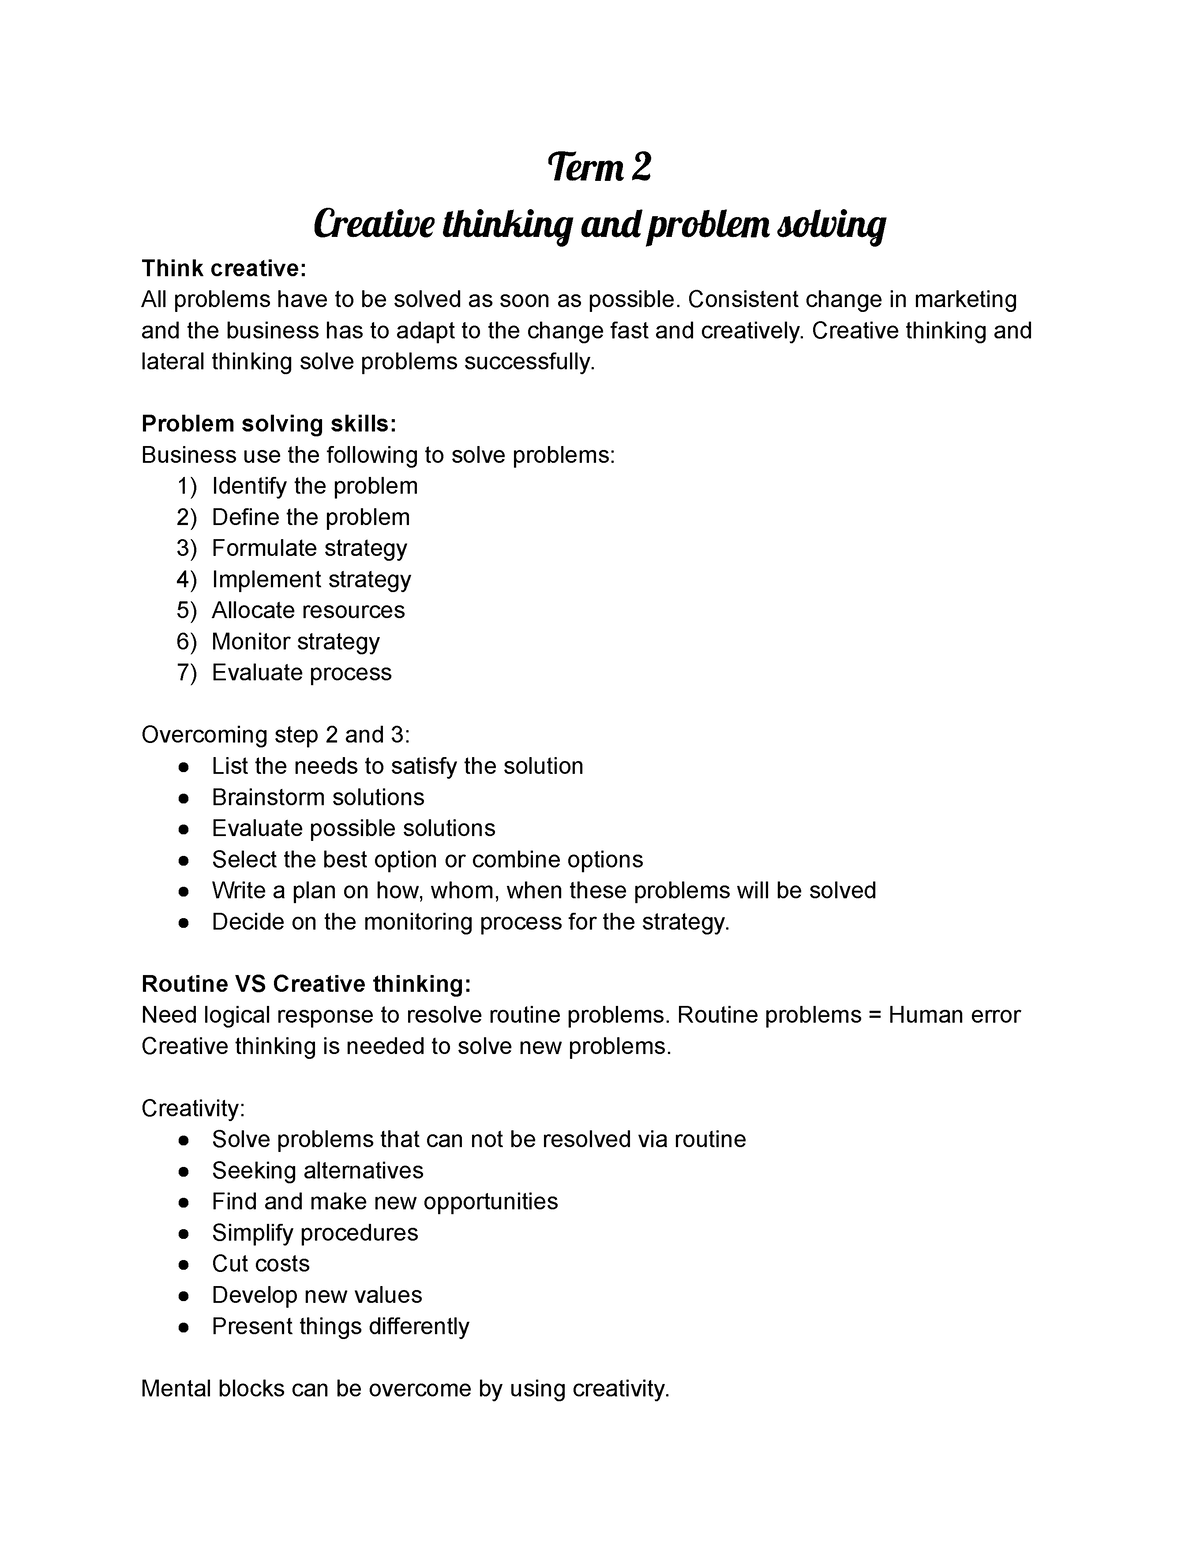 creative thinking and problem solving essay grade 10 pdf download